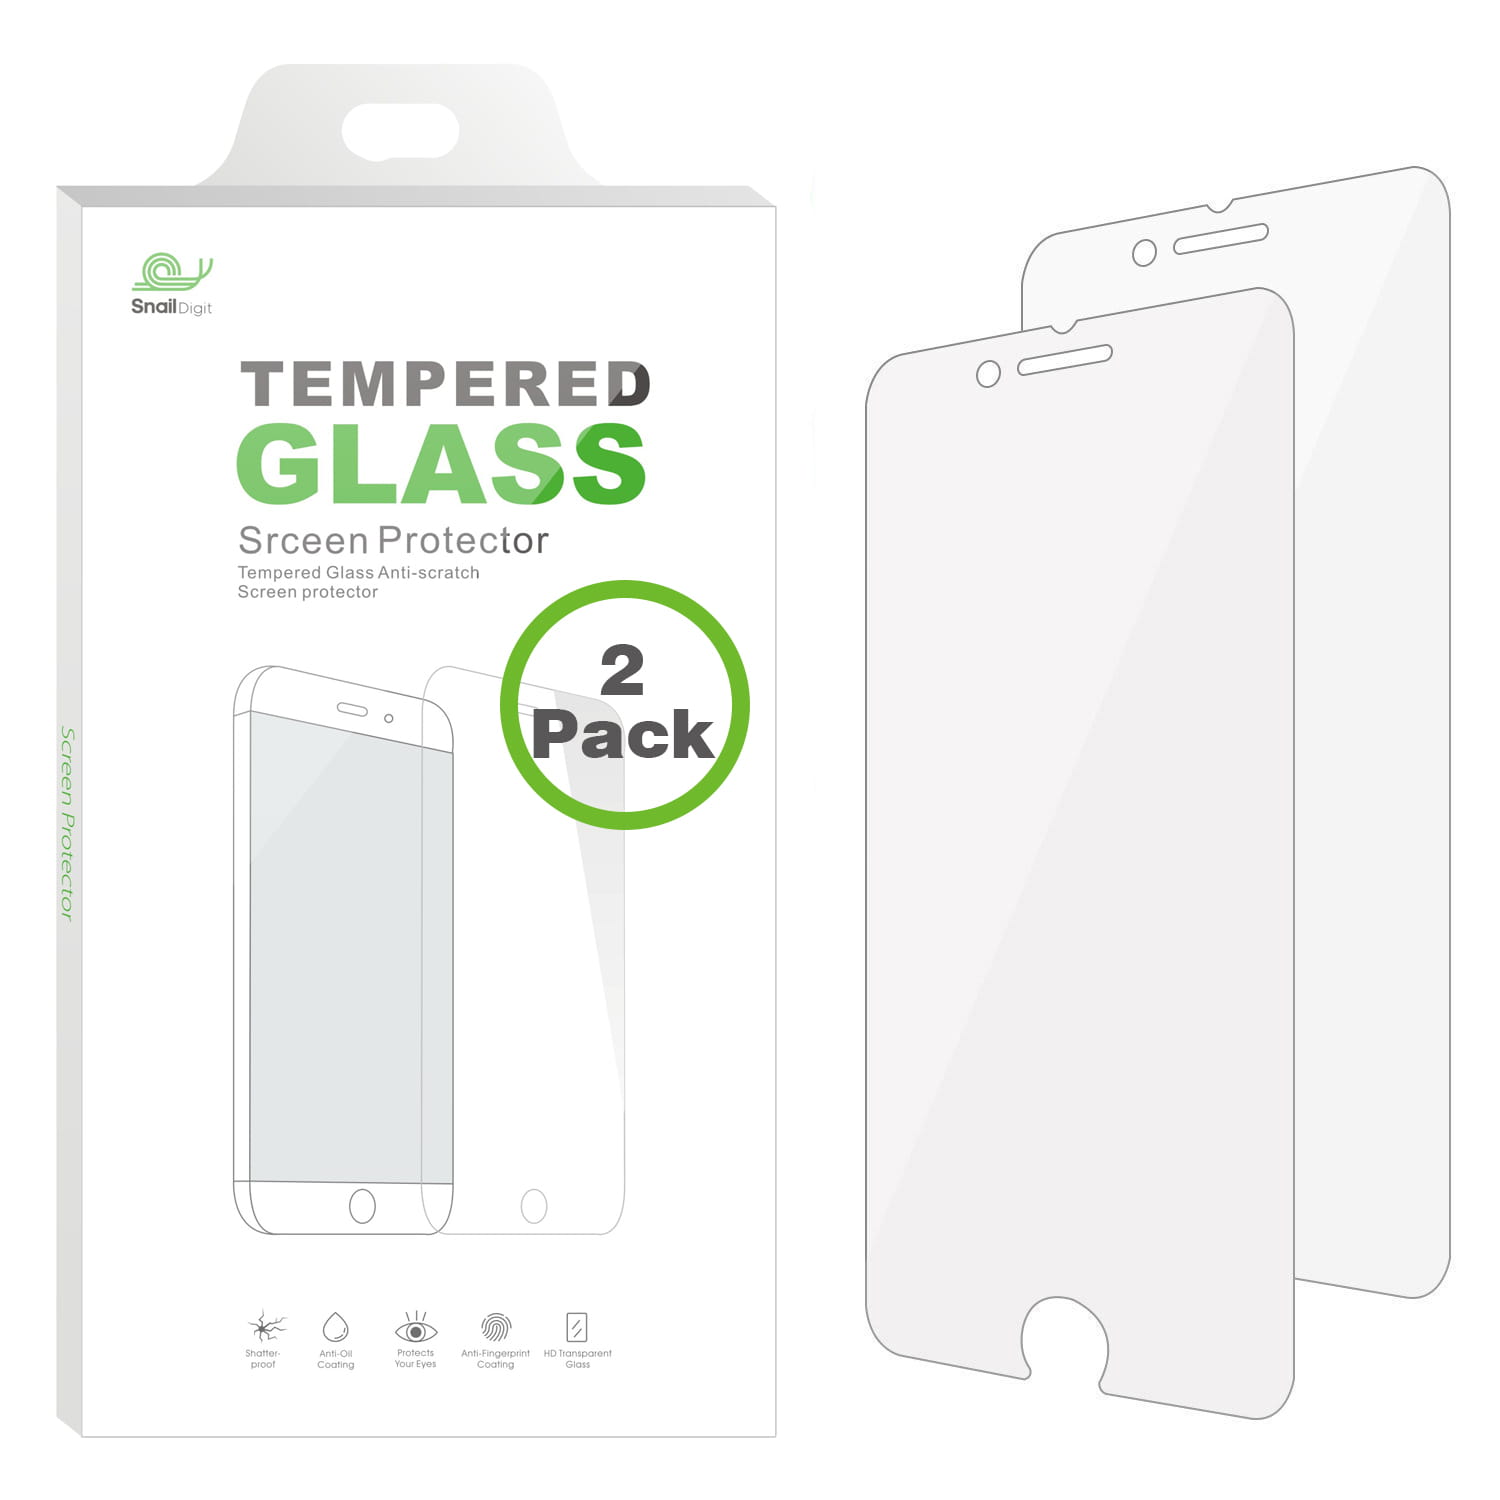 8 Plus Screen Protector 6S 7/8-1 Pack HD Screen Protector Film for iPhone 6 Bear Village® Tempered Glass Screen Protector 6S Plus iPhone 6 Plus 7 Plus 